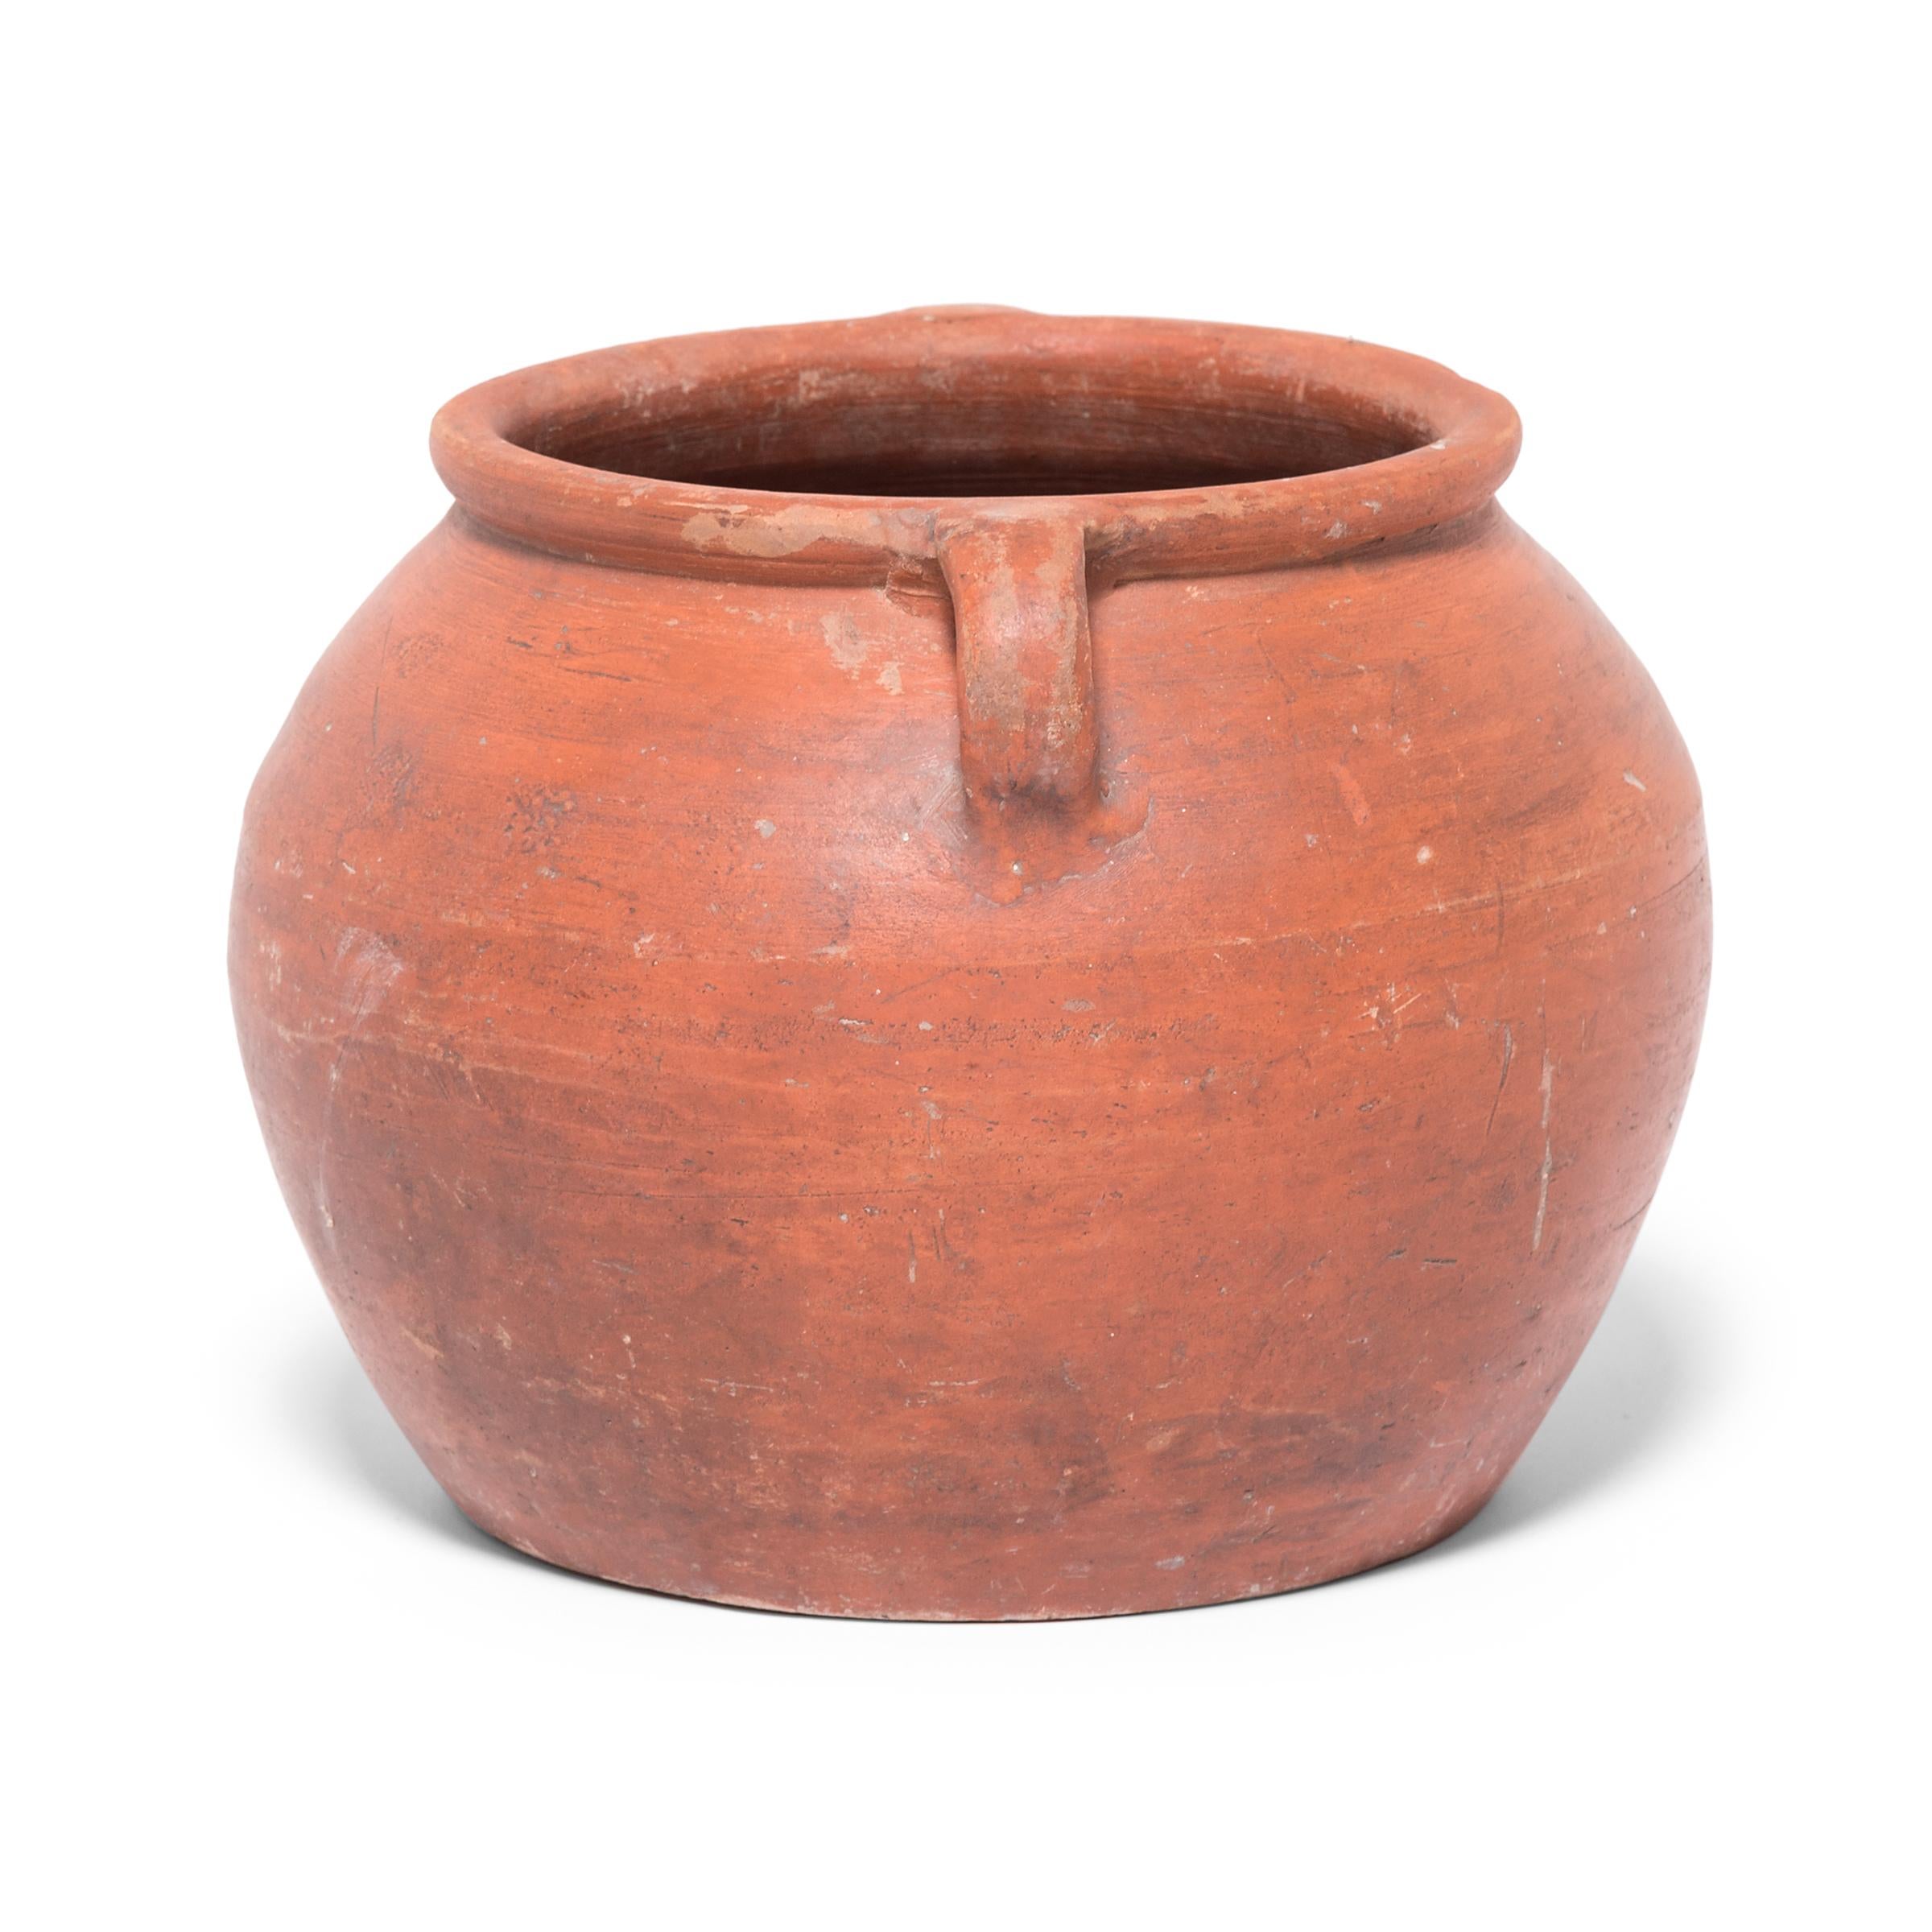 Based on vessels fired in ancient Chinese kilns, this jar's perfect proportions haven't changed much since the Bronze Age. Keeping in the tradition of its predecessors, this early 20th century ceramic vessel is glazed with a slip of red clay,